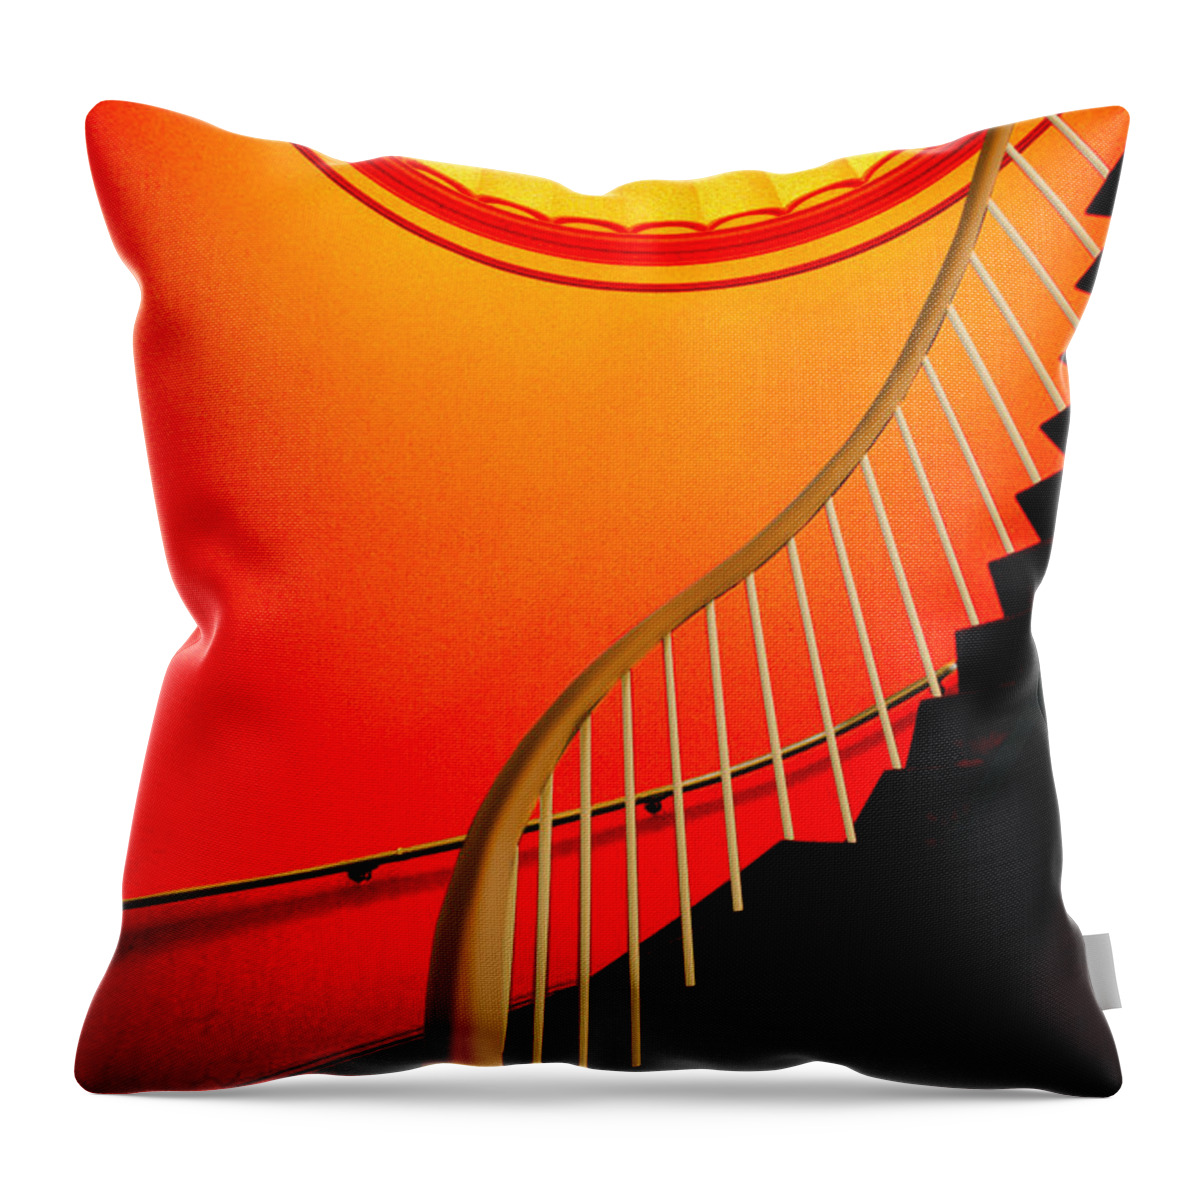 Capital Throw Pillow featuring the photograph Capital Stairs by Paul Wear